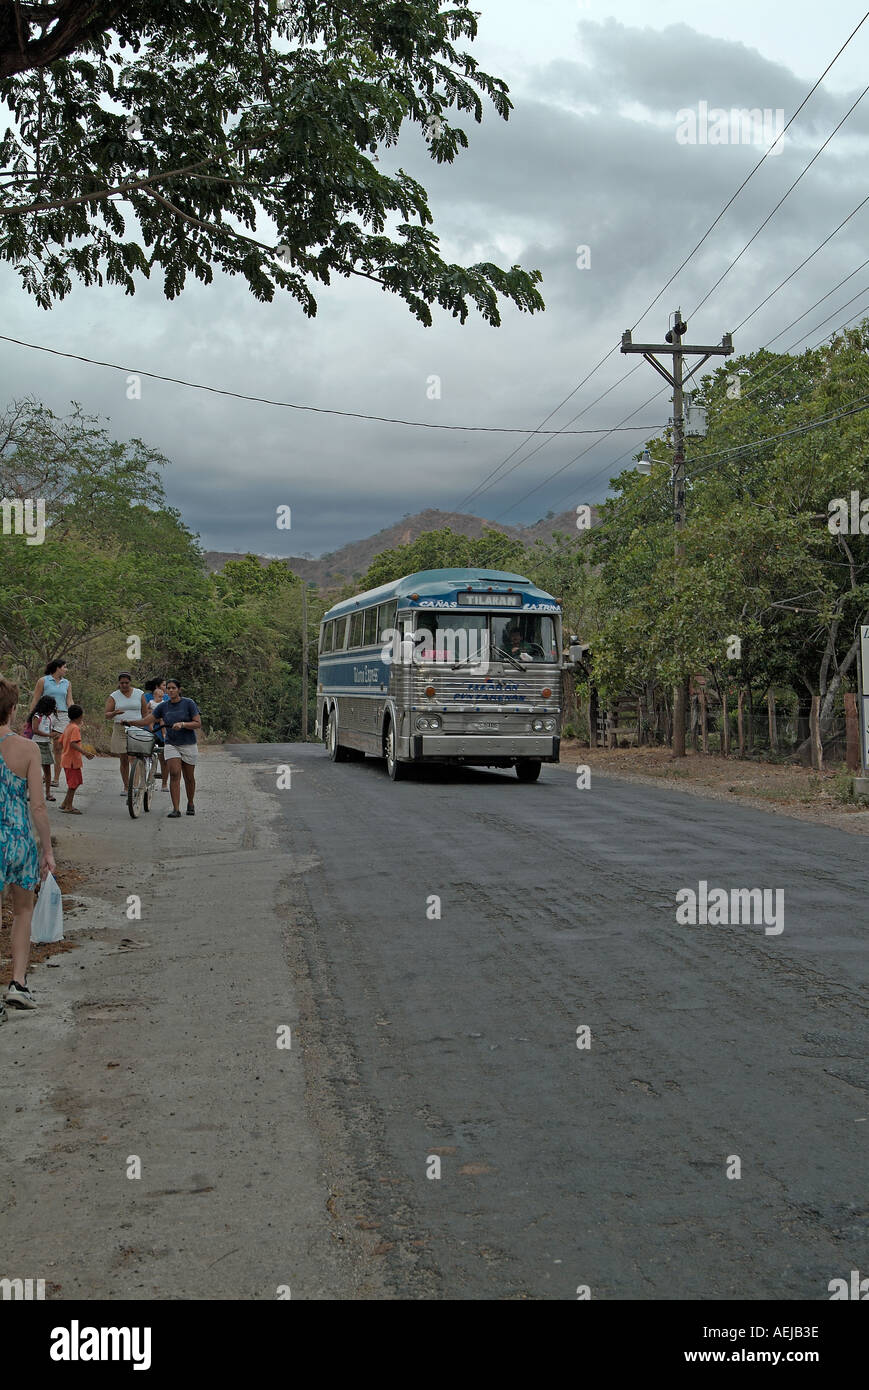 Bus on the road in Guanacaste province, Costa Rica Stock Photo